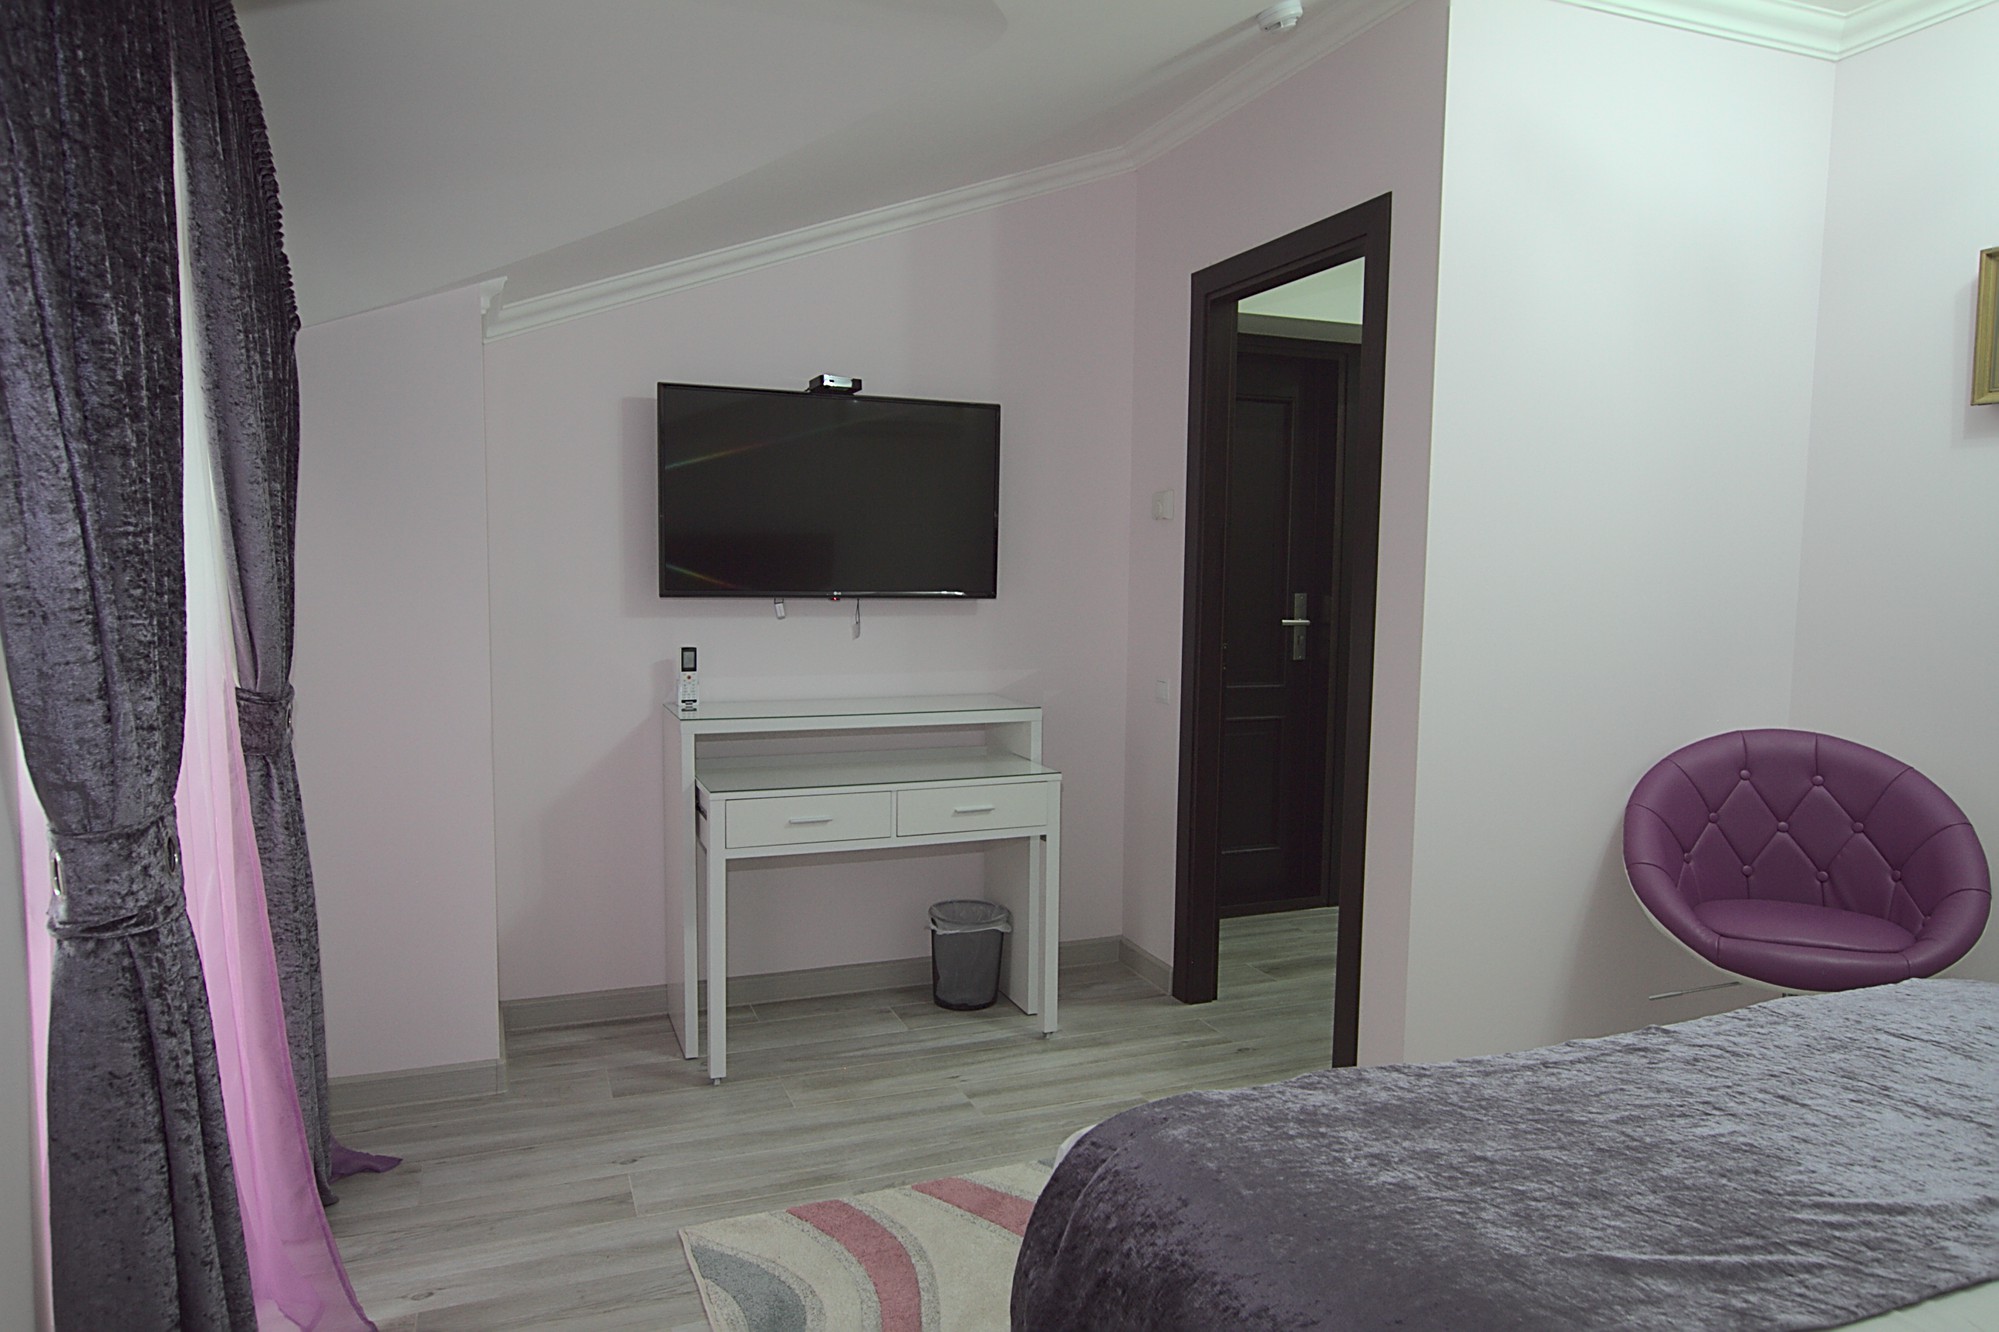 Self Check-in 1 is a 2 rooms apartment for rent in Chisinau, Moldova